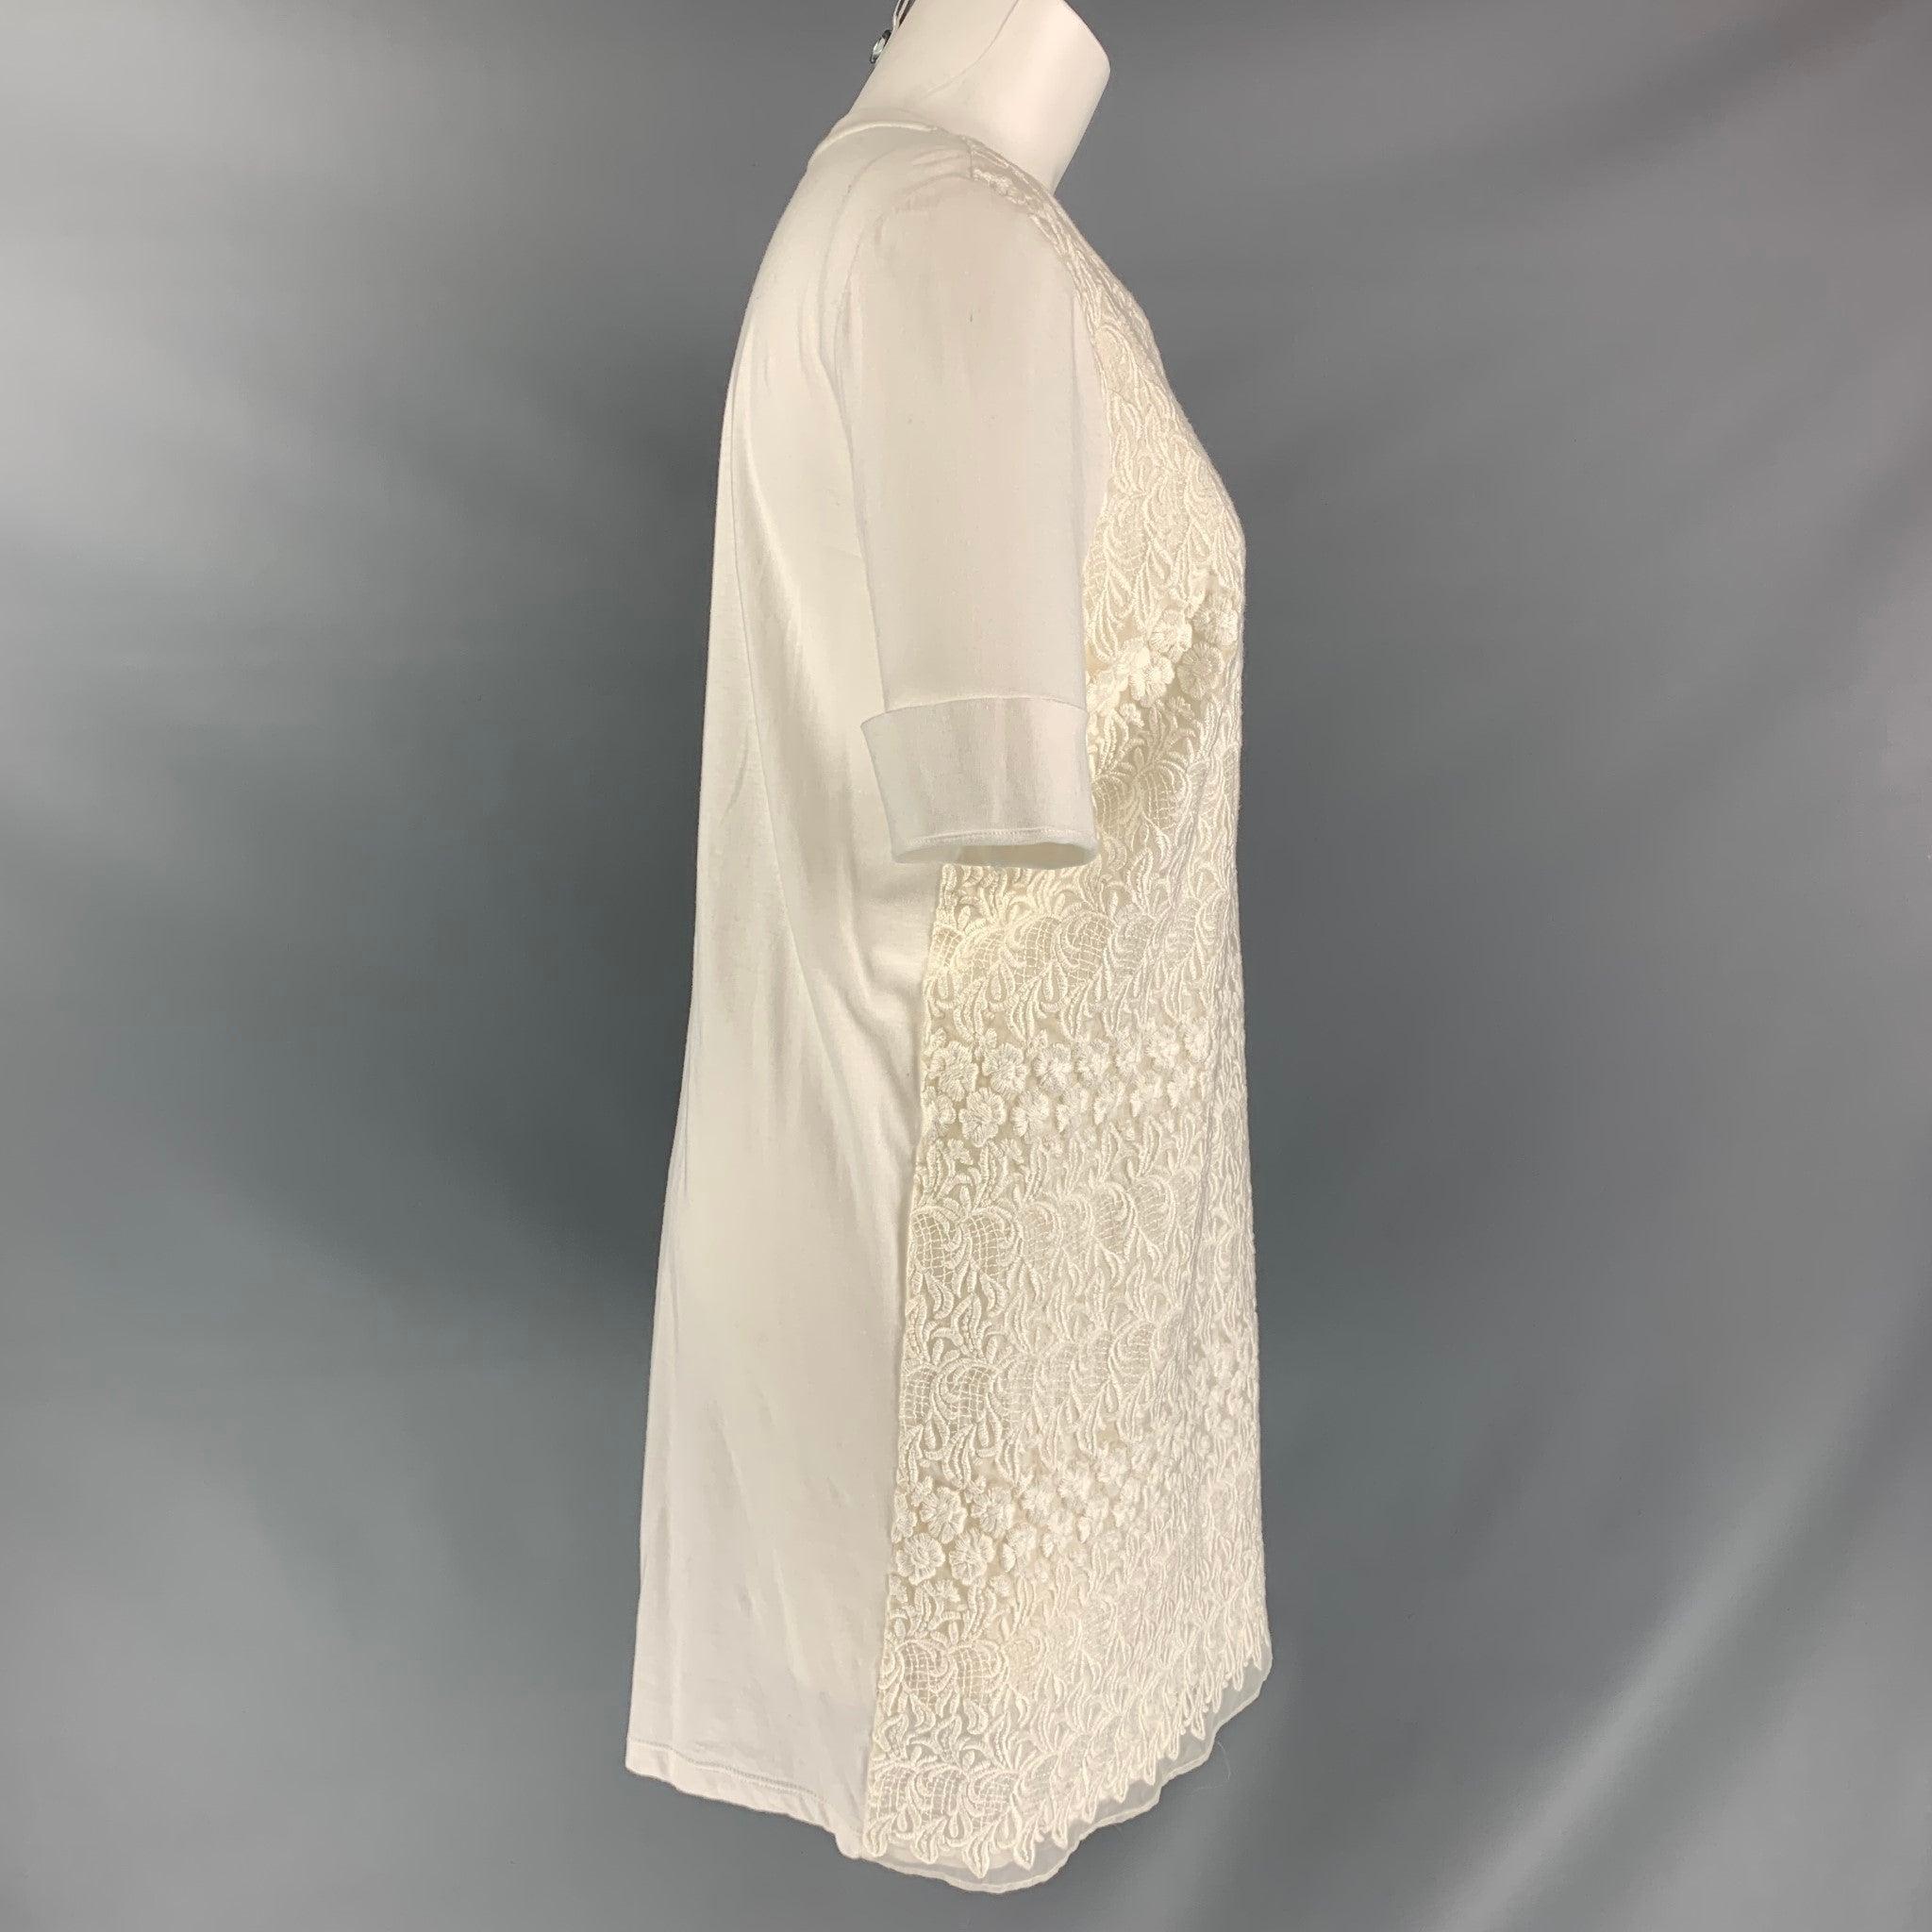 GIAMBATTISTA VALLI t-shirt knee high dress comes in white cotton jersey and white lace fabrics. Made in Italy.
Excellent Good Pre-Owned Condition.  

Marked:   M 

Measurements: 
 
Shoulder: 16 inBust: 40 inWaist: 40 inHip: 40 in Length: 34 in


  
